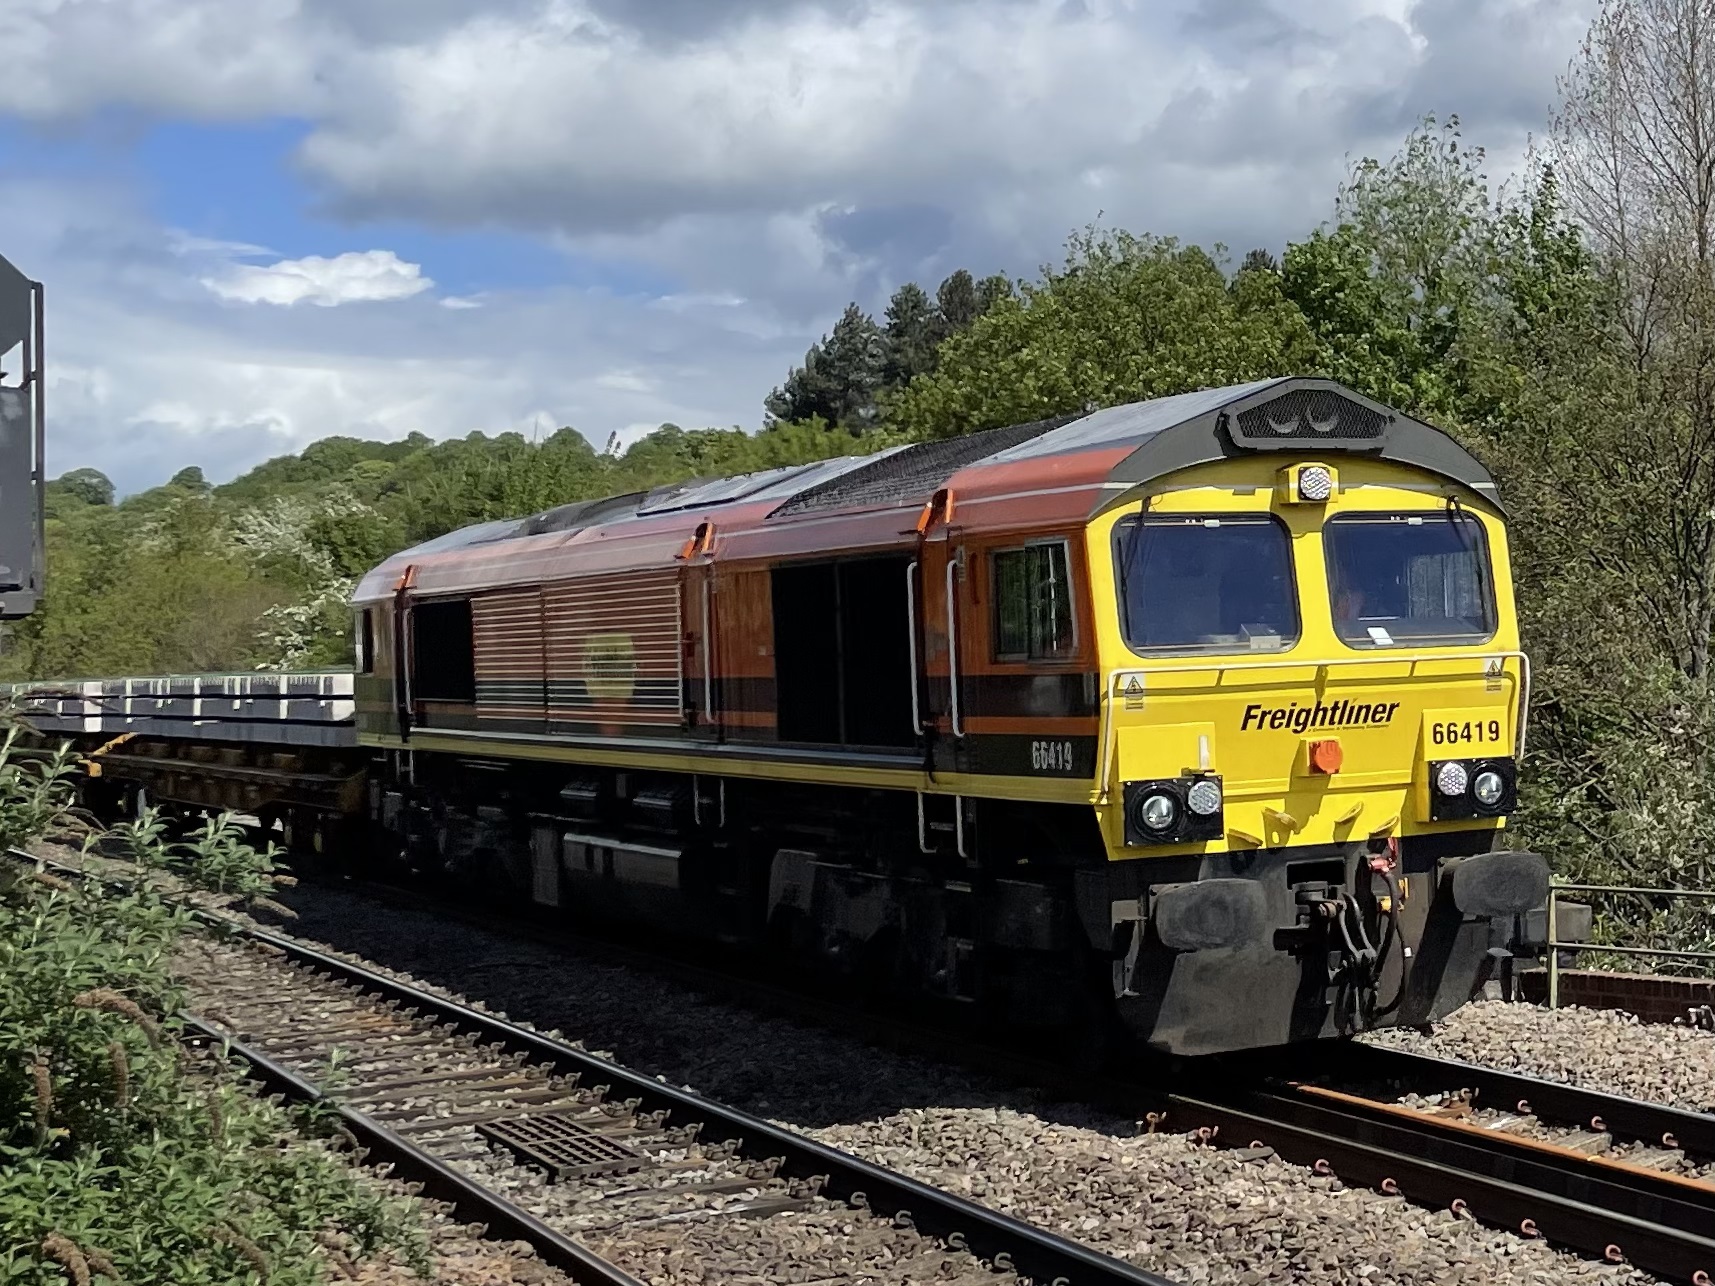 66419 passes to the side of a platform 3 with a southbound Doncaster - Toton working: Image credit - Peter Hughes